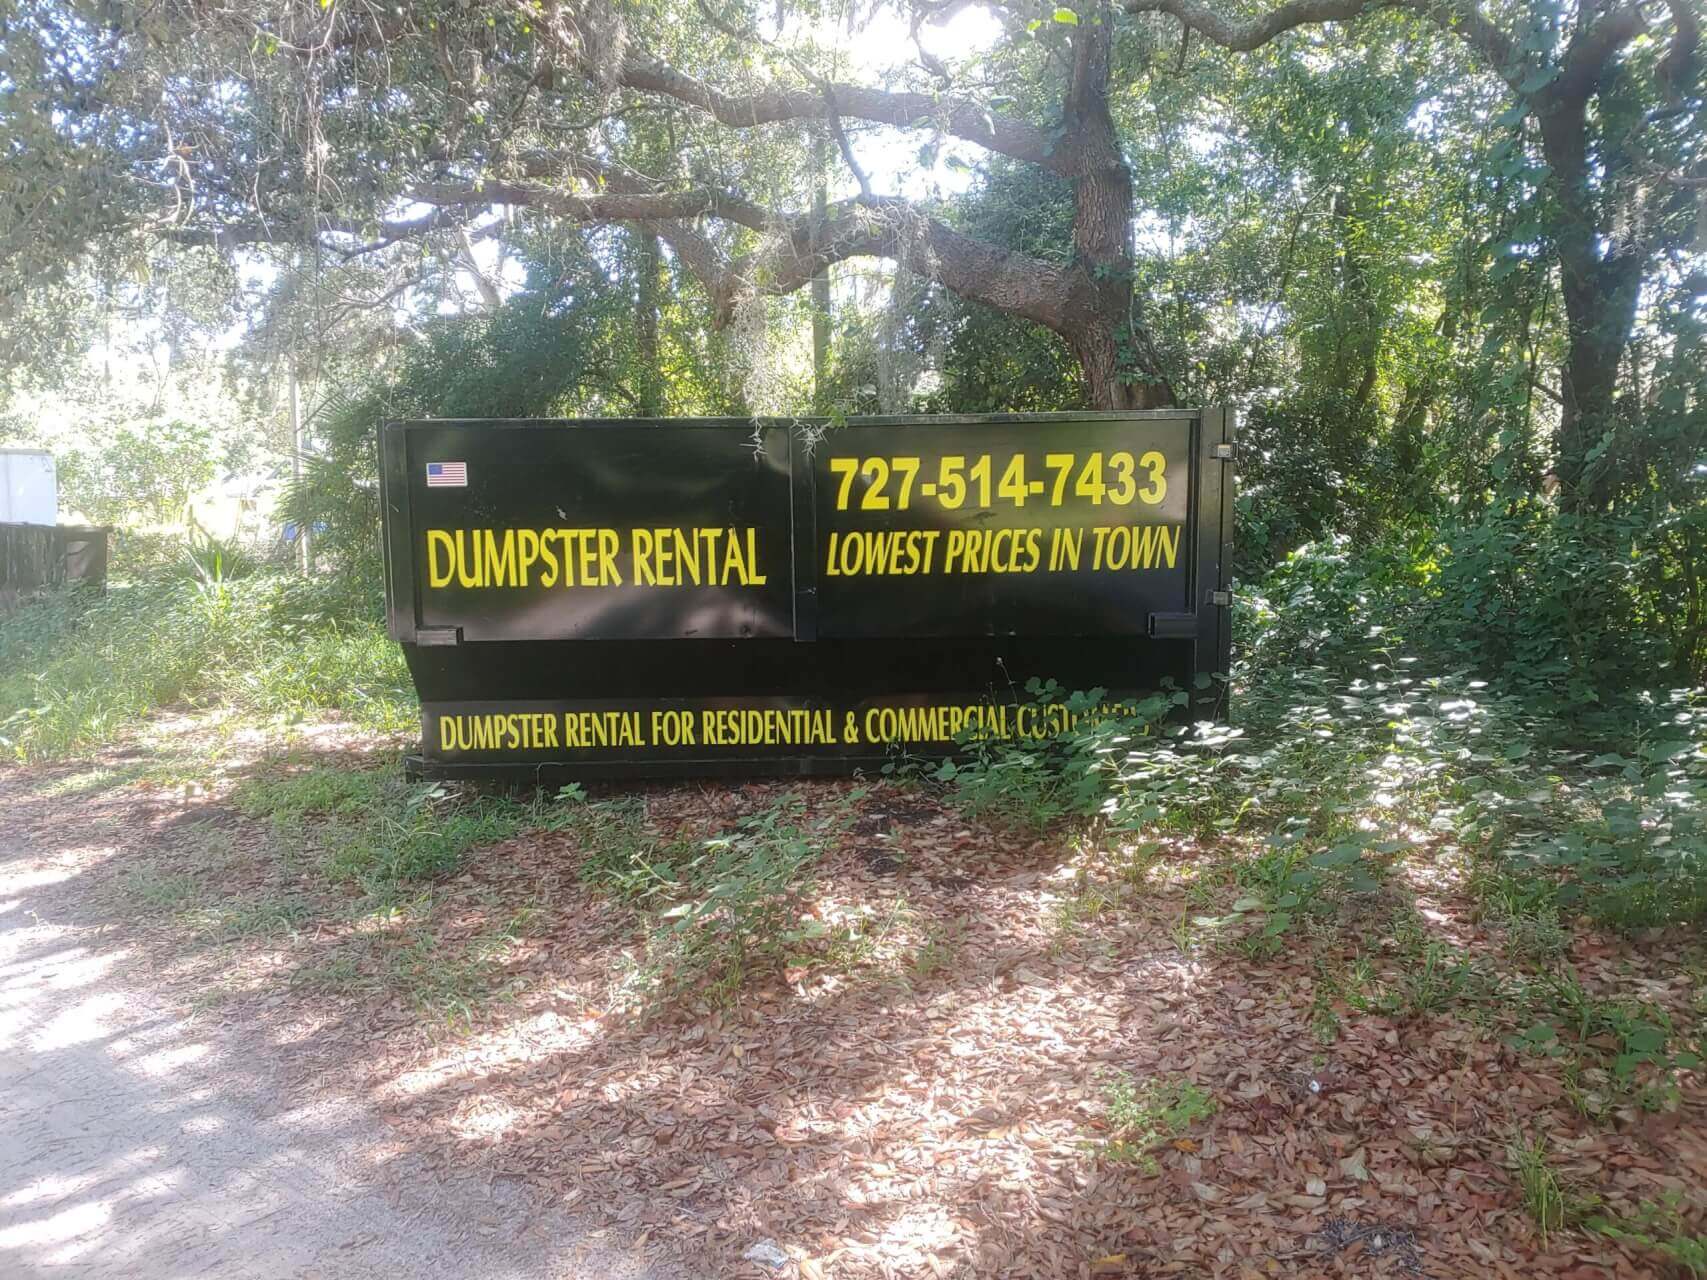 Dumpster Rentals Junk Removal Clean Out Services New Port Richey Holiday FL scaled